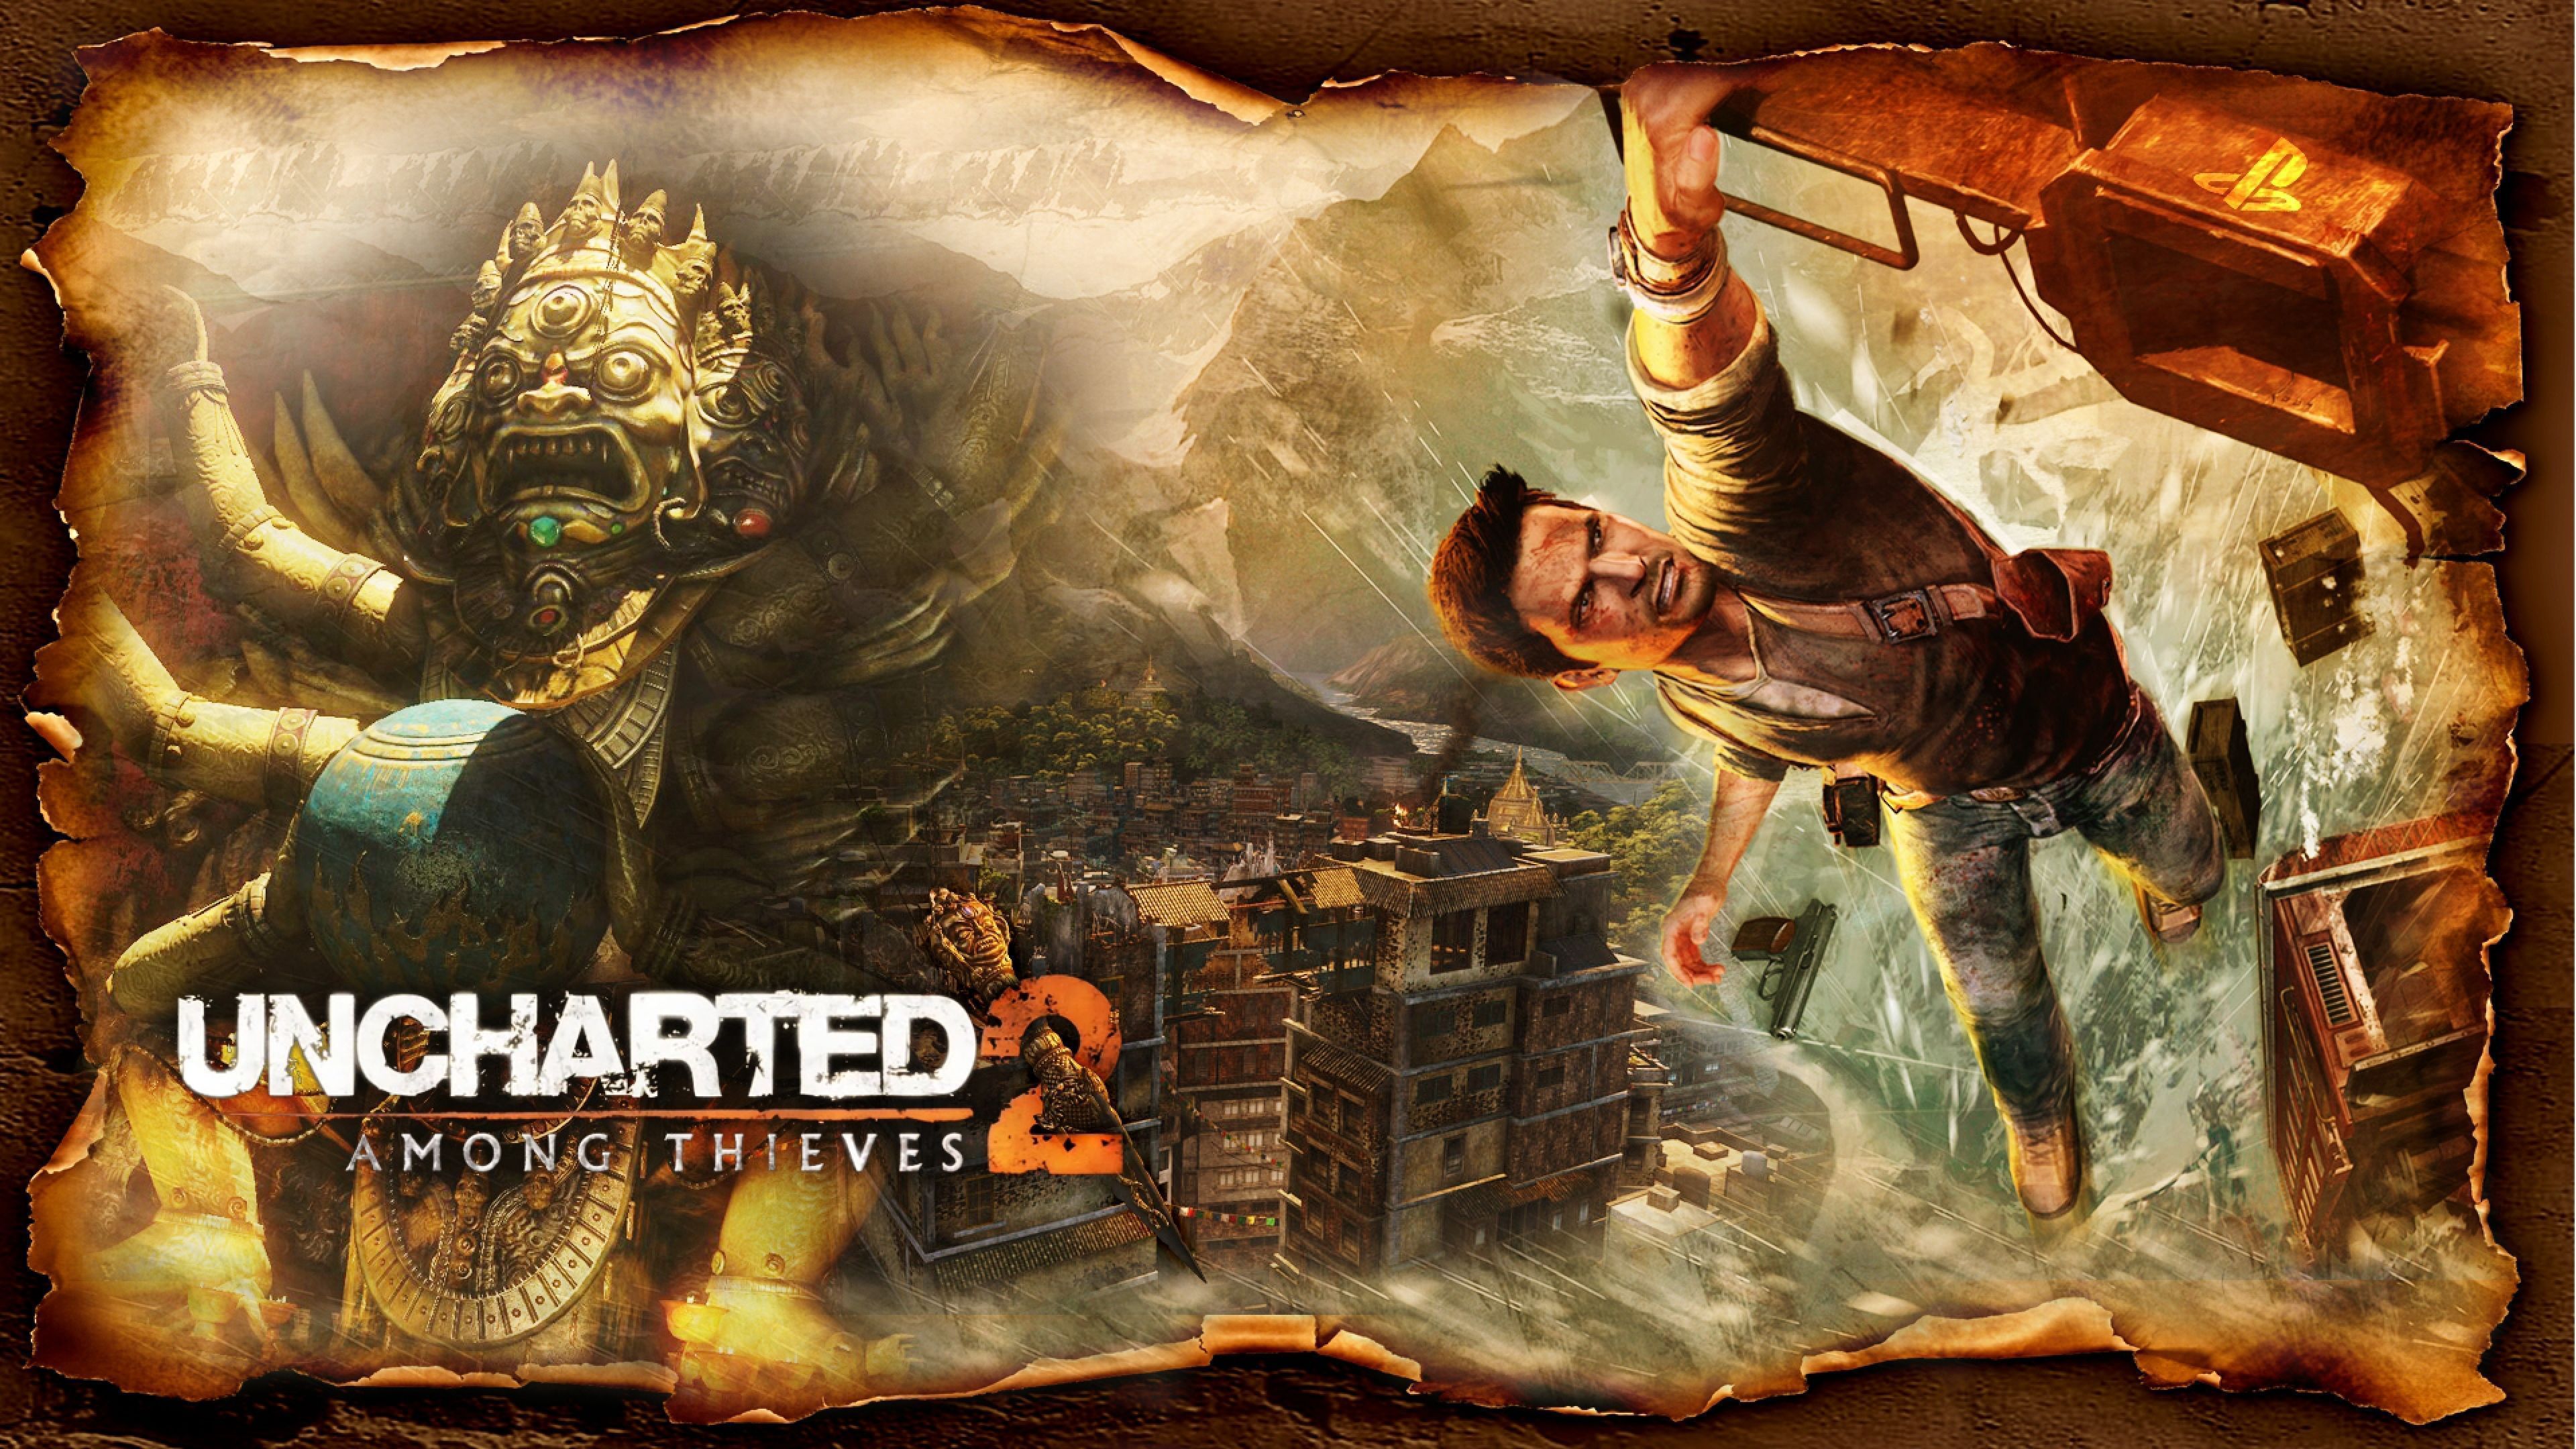 Download Wallpaper 3840x2160 Uncharted 2 among thieves, City ...